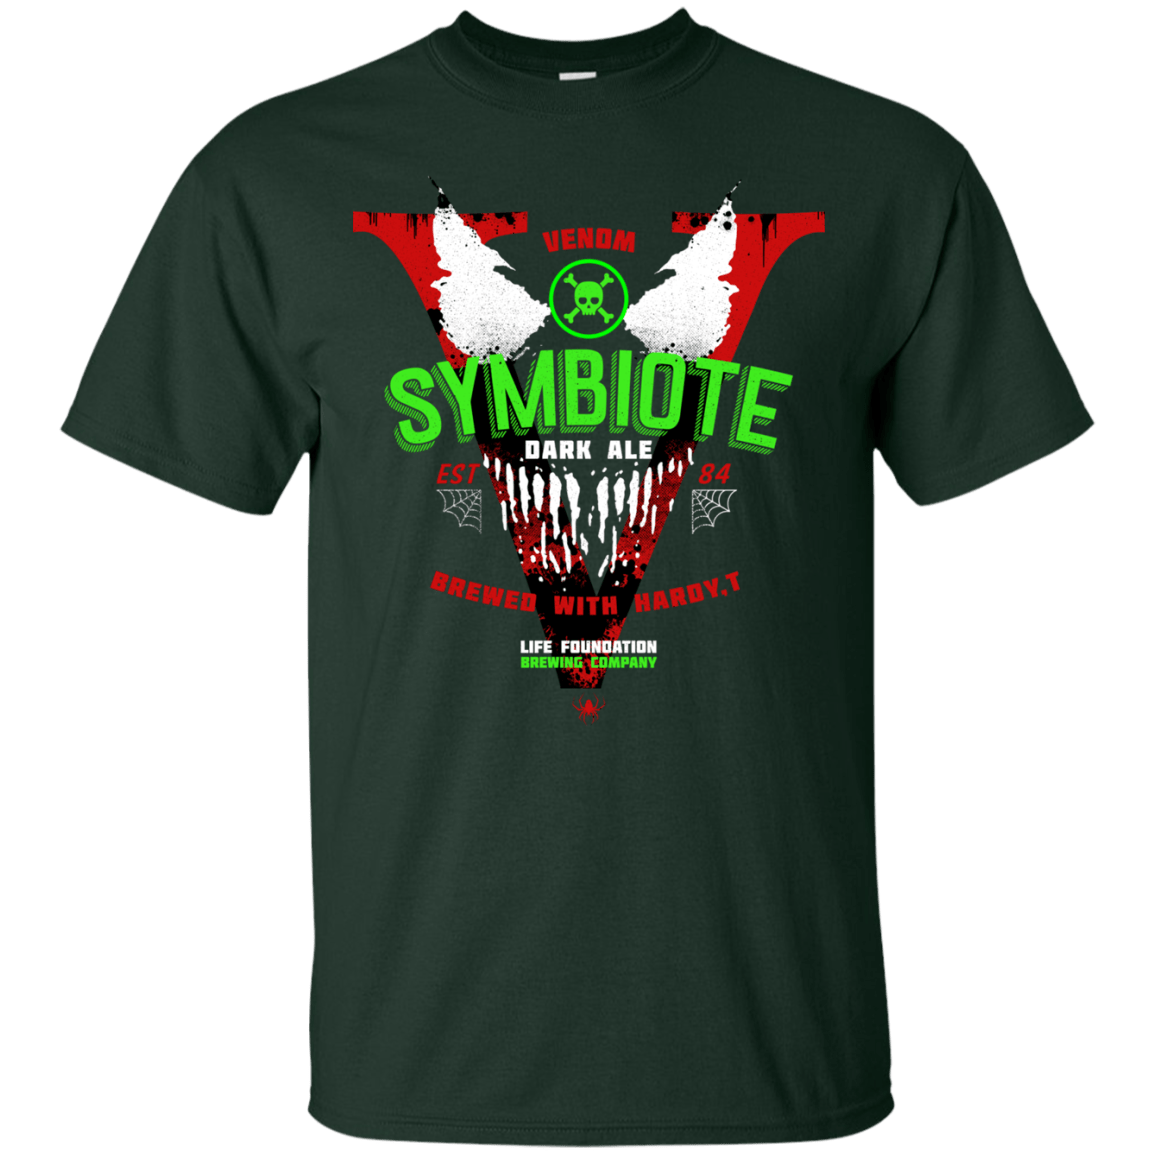 T-Shirts Forest / S Symbiote Dark Ale T-Shirt